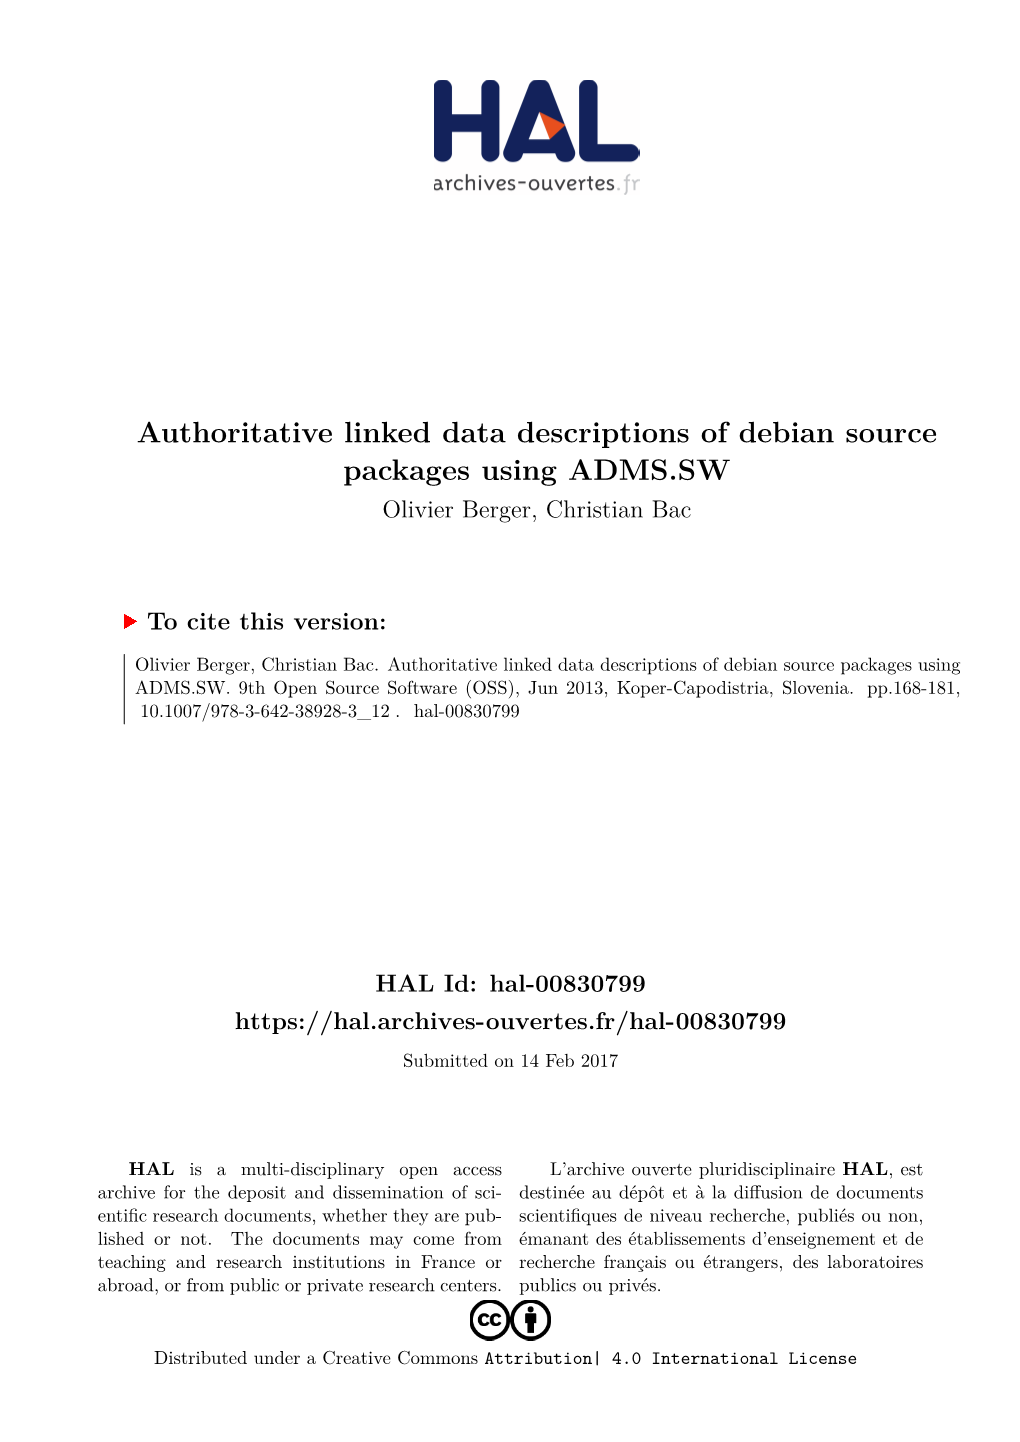 Authoritative Linked Data Descriptions of Debian Source Packages Using ADMS.SW Olivier Berger, Christian Bac